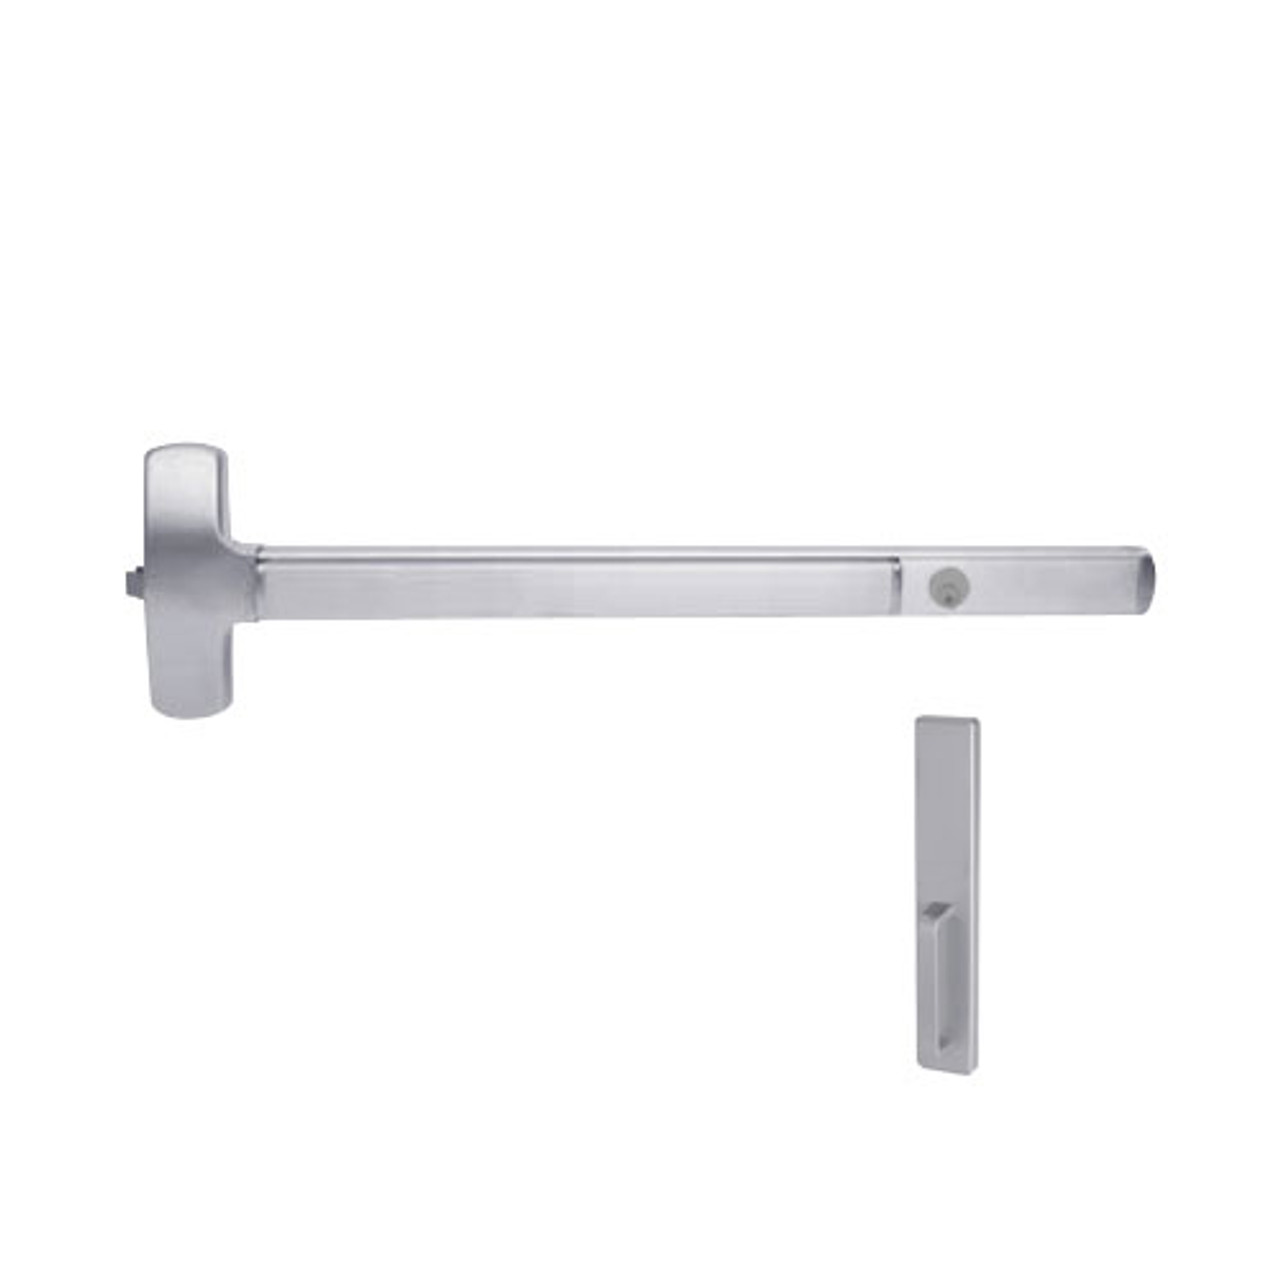 CD25-R-DT-US32-3 Falcon Exit Device in Polished Stainless Steel